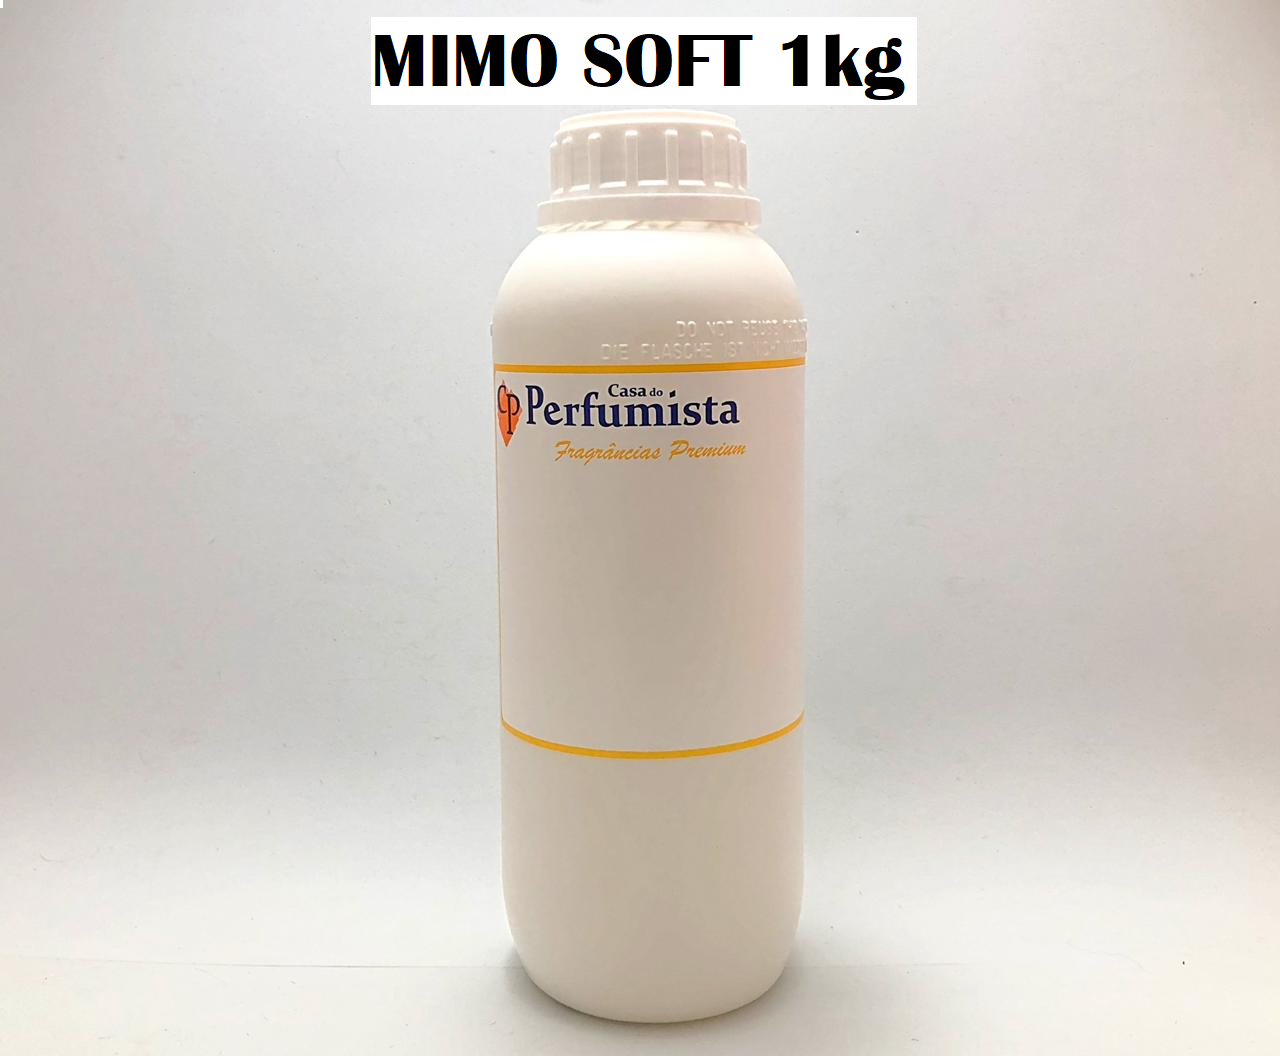 MIMO SOFT - 1kg